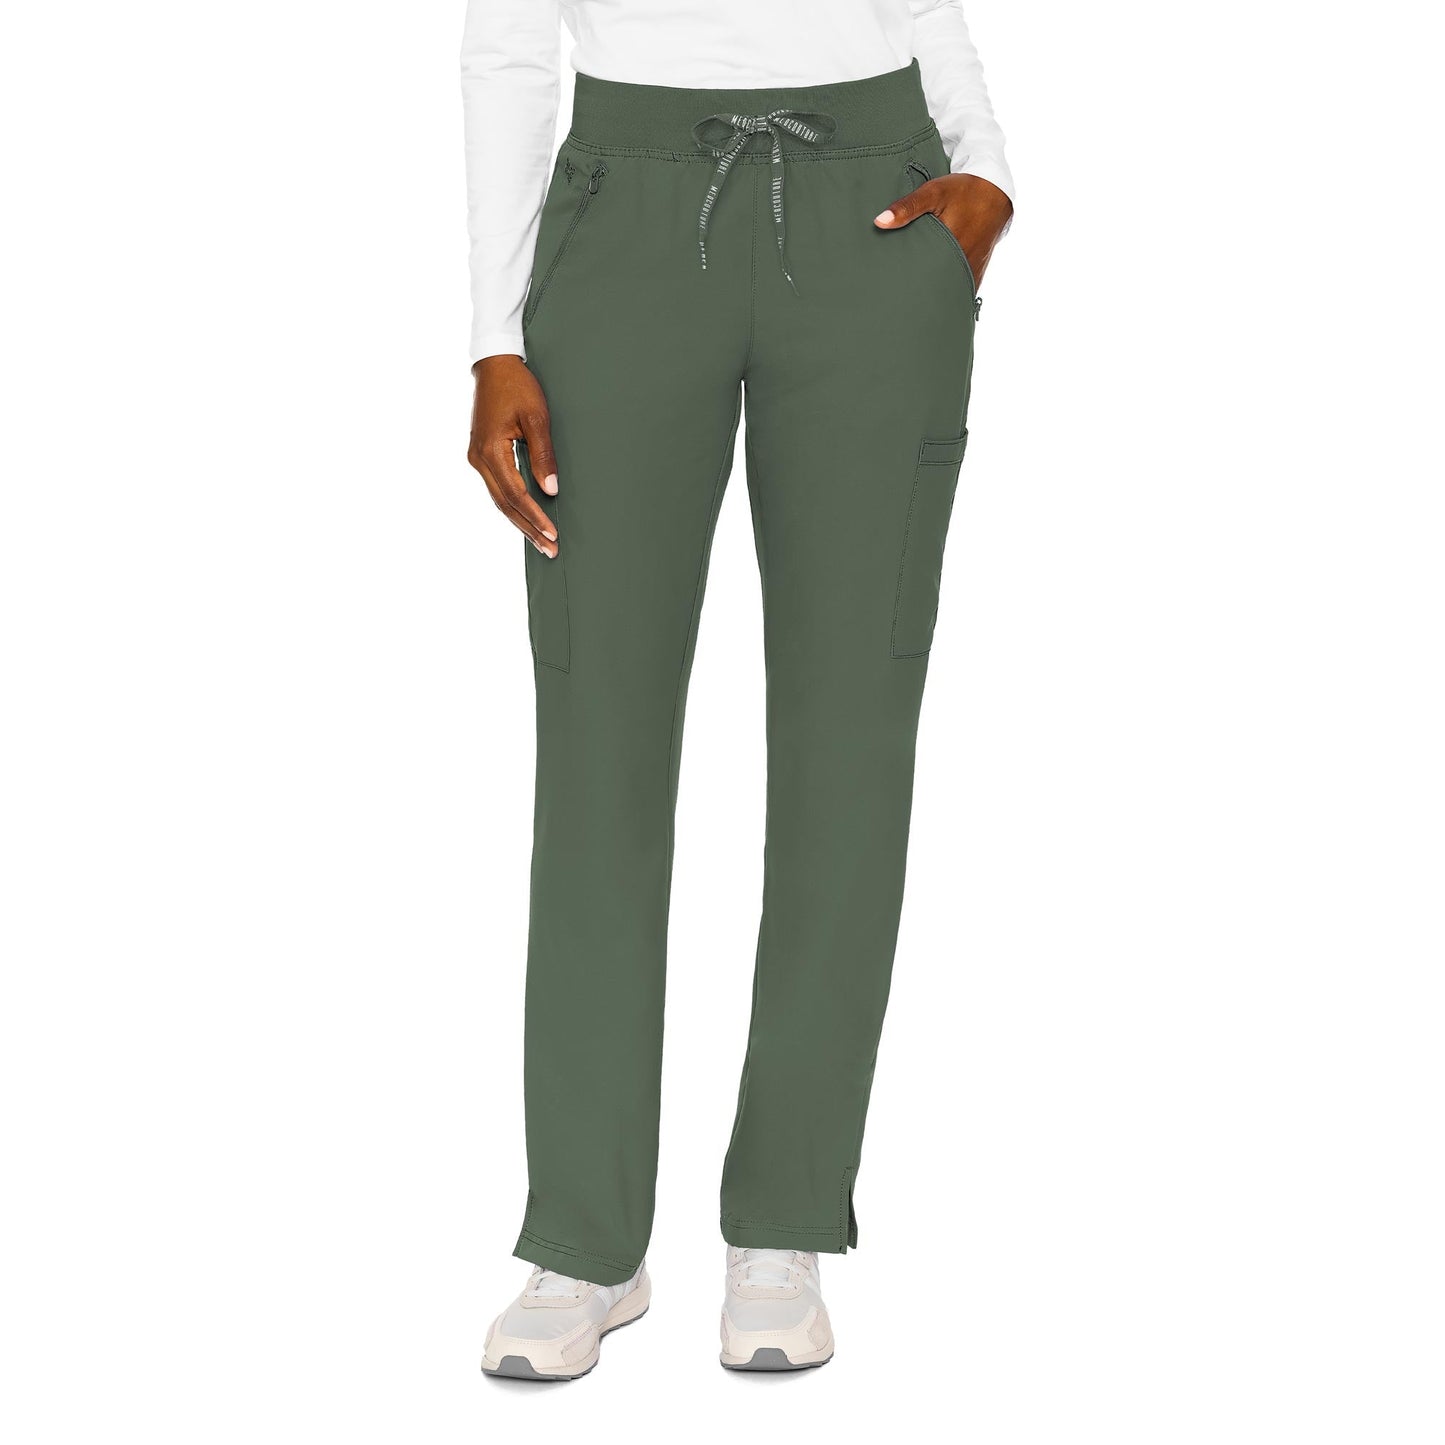 Med Couture Insight Zipper Pant Regular Length (16 colors in XXS-XL)